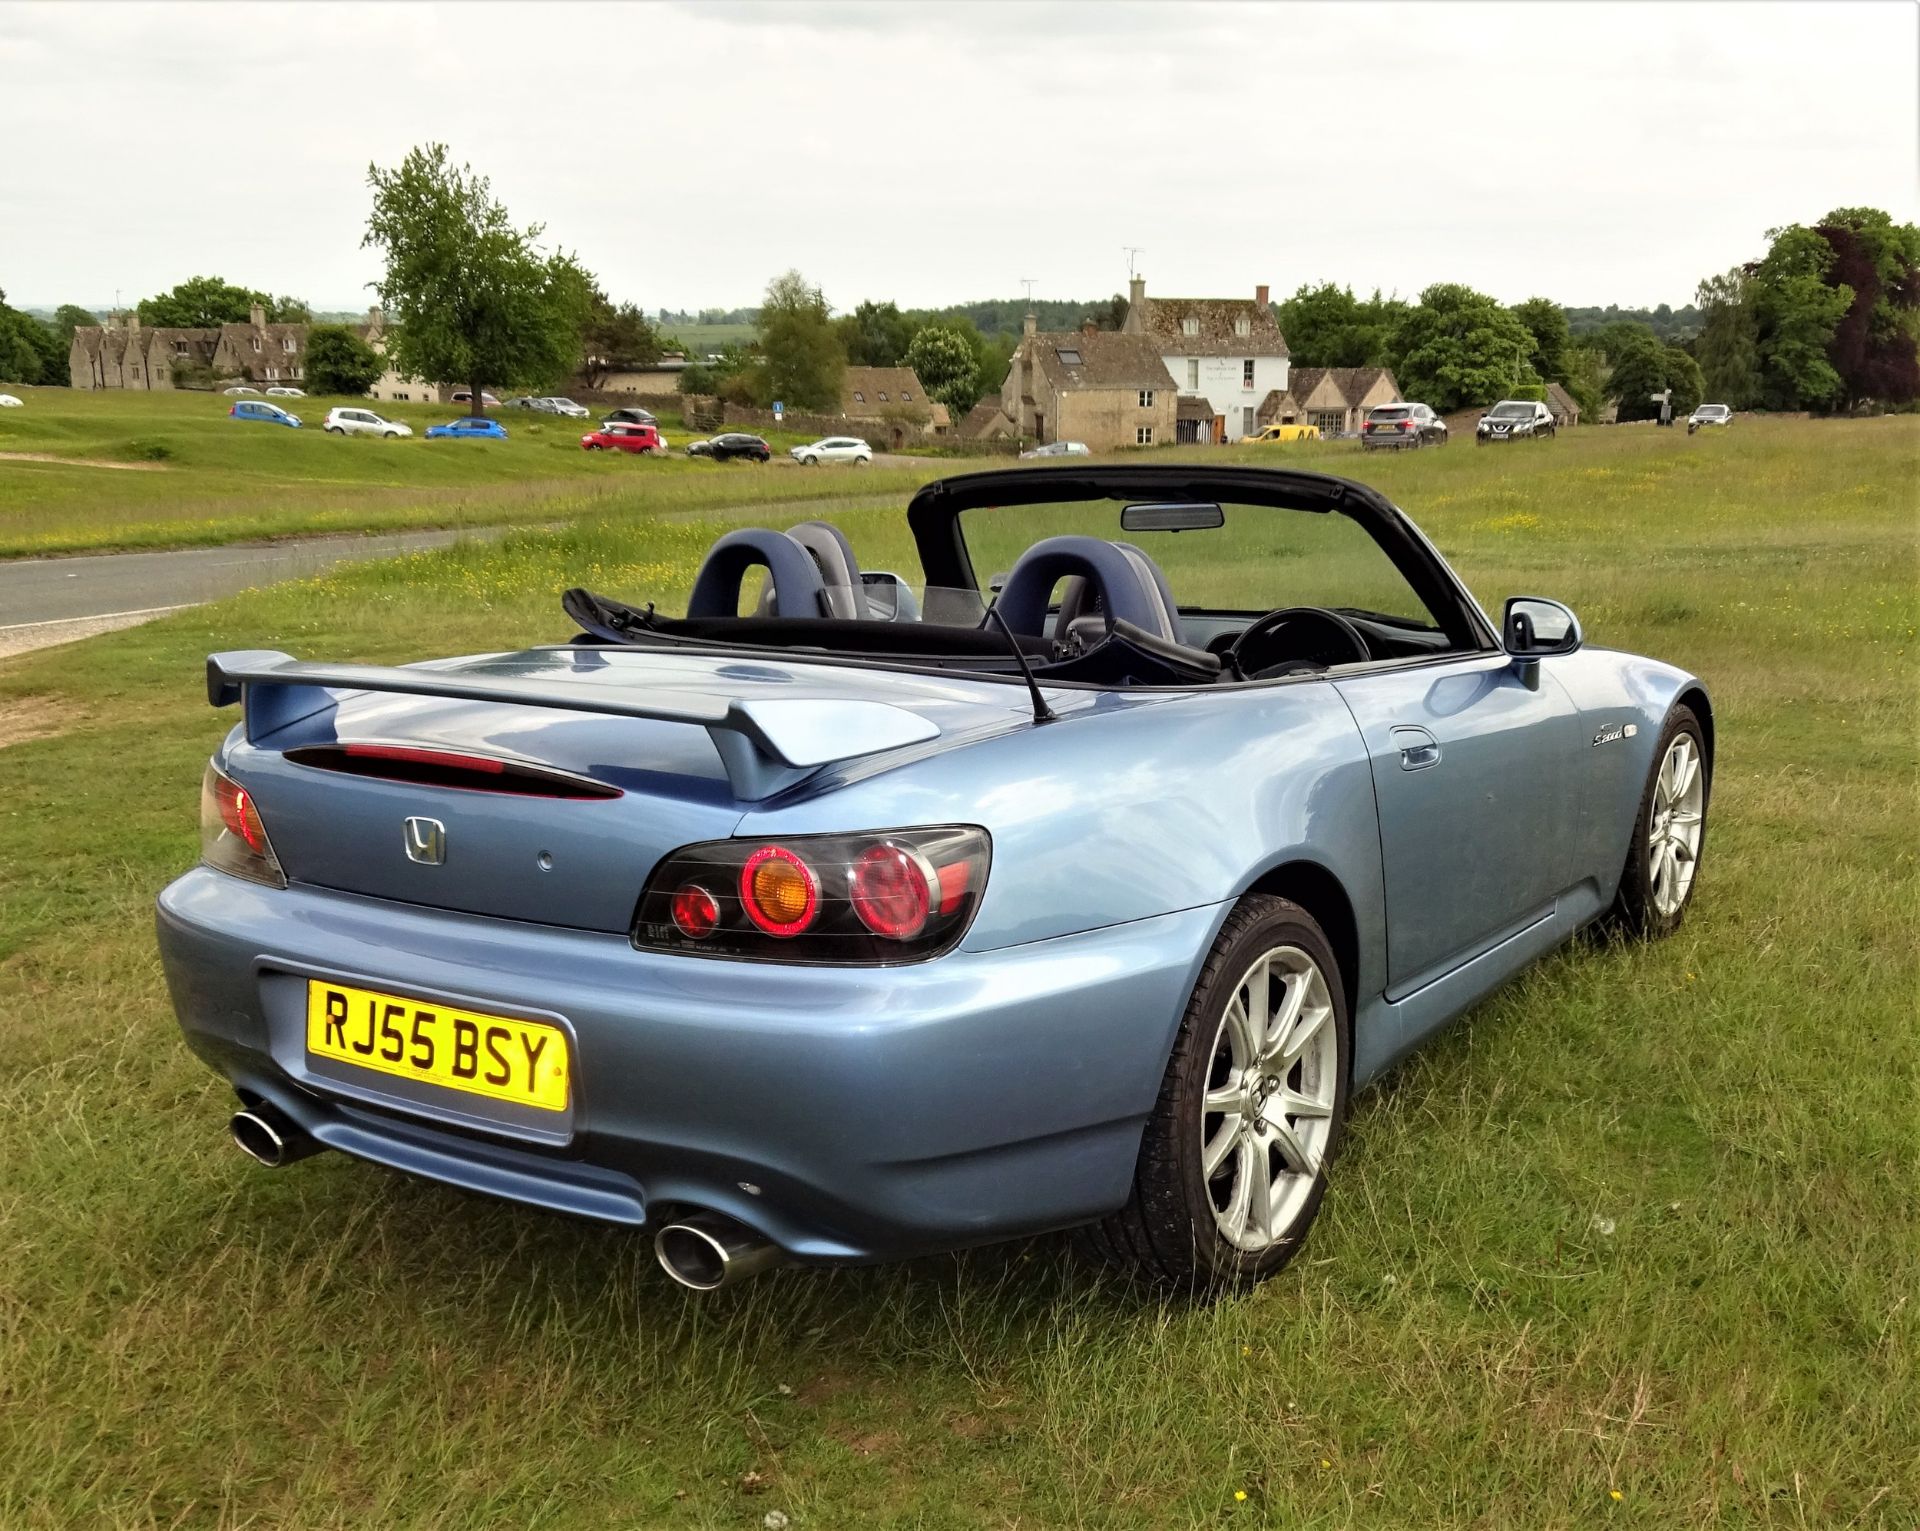 2005 HONDA S2000 Registration Number: RJ55 BSY Chassis Number: JHMPA11305S202028 - In current - Image 2 of 15